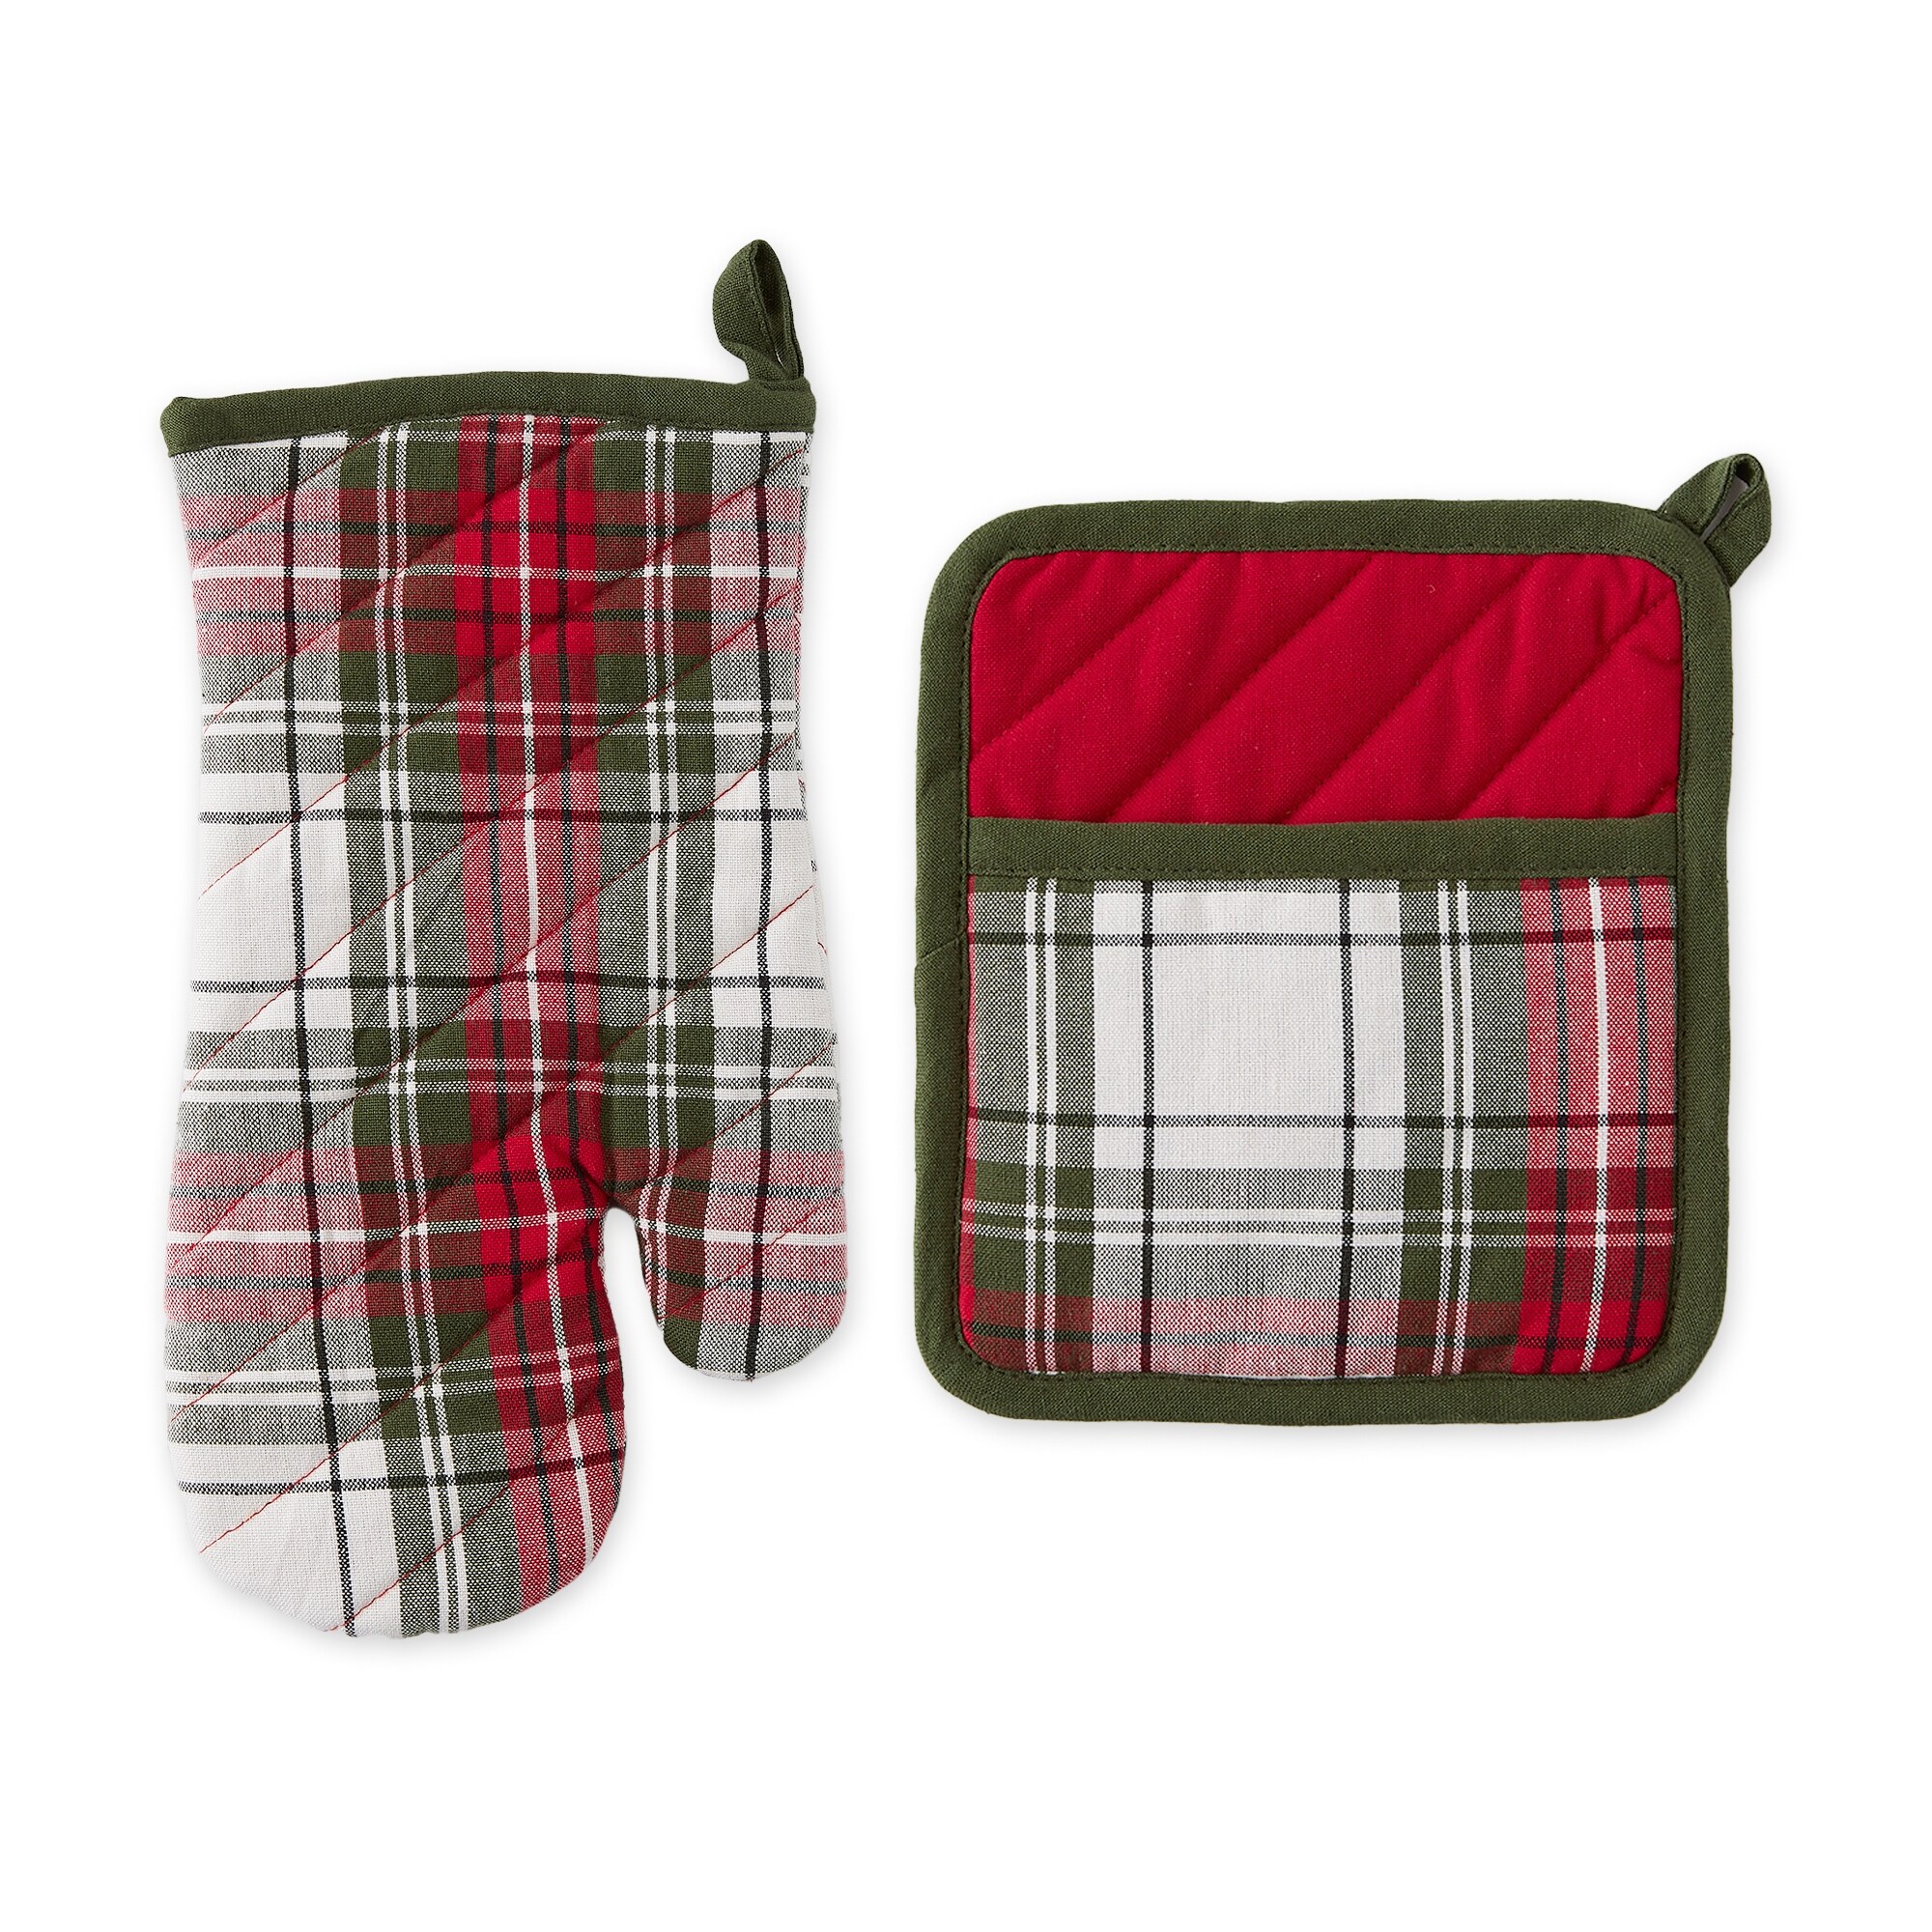 https://ak1.ostkcdn.com/images/products/is/images/direct/e429abc3919c0d83cf31ddfee7159bba19151231/Heritage-Holiday-Sprigs-Oven-Mitt-%26-Potholder-Set.jpg